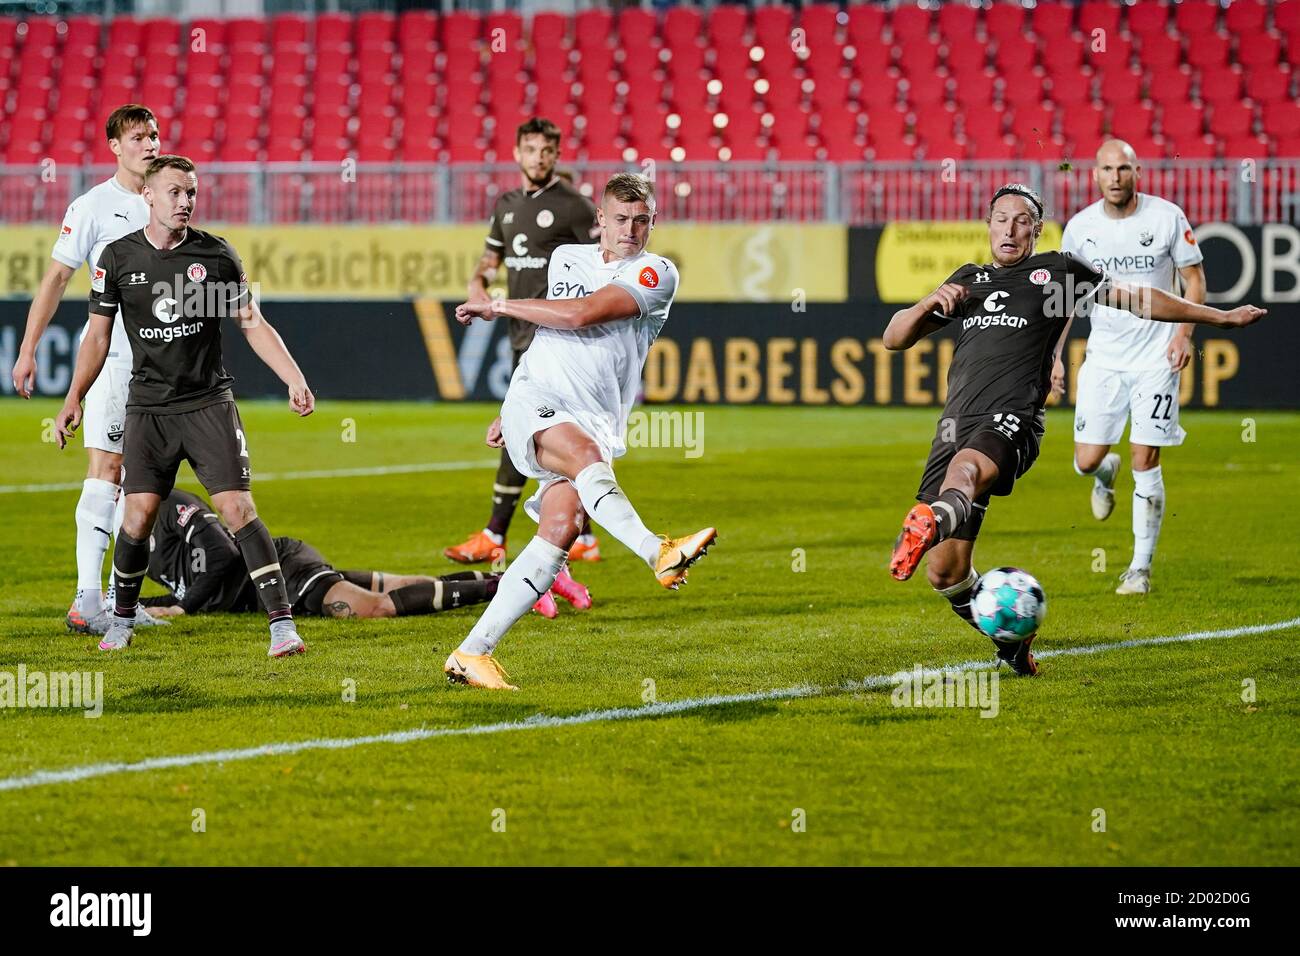 Sandhausen, Germany. 02nd Oct, 2020. Football: 2nd Bundesliga, SV Sandhausen - FC St. Pauli, 3rd matchday, Hardtwaldstadion. Sandhausen's Aleksandr Zhirov (4th from left) scores the goal that was later not given because of a handicap to make it 2-0. Credit: Uwe Anspach/dpa - IMPORTANT NOTE: In accordance with the regulations of the DFL Deutsche Fußball Liga and the DFB Deutscher Fußball-Bund, it is prohibited to exploit or have exploited in the stadium and/or from the game taken photographs in the form of sequence images and/or video-like photo series./dpa/Alamy Live News Stock Photo